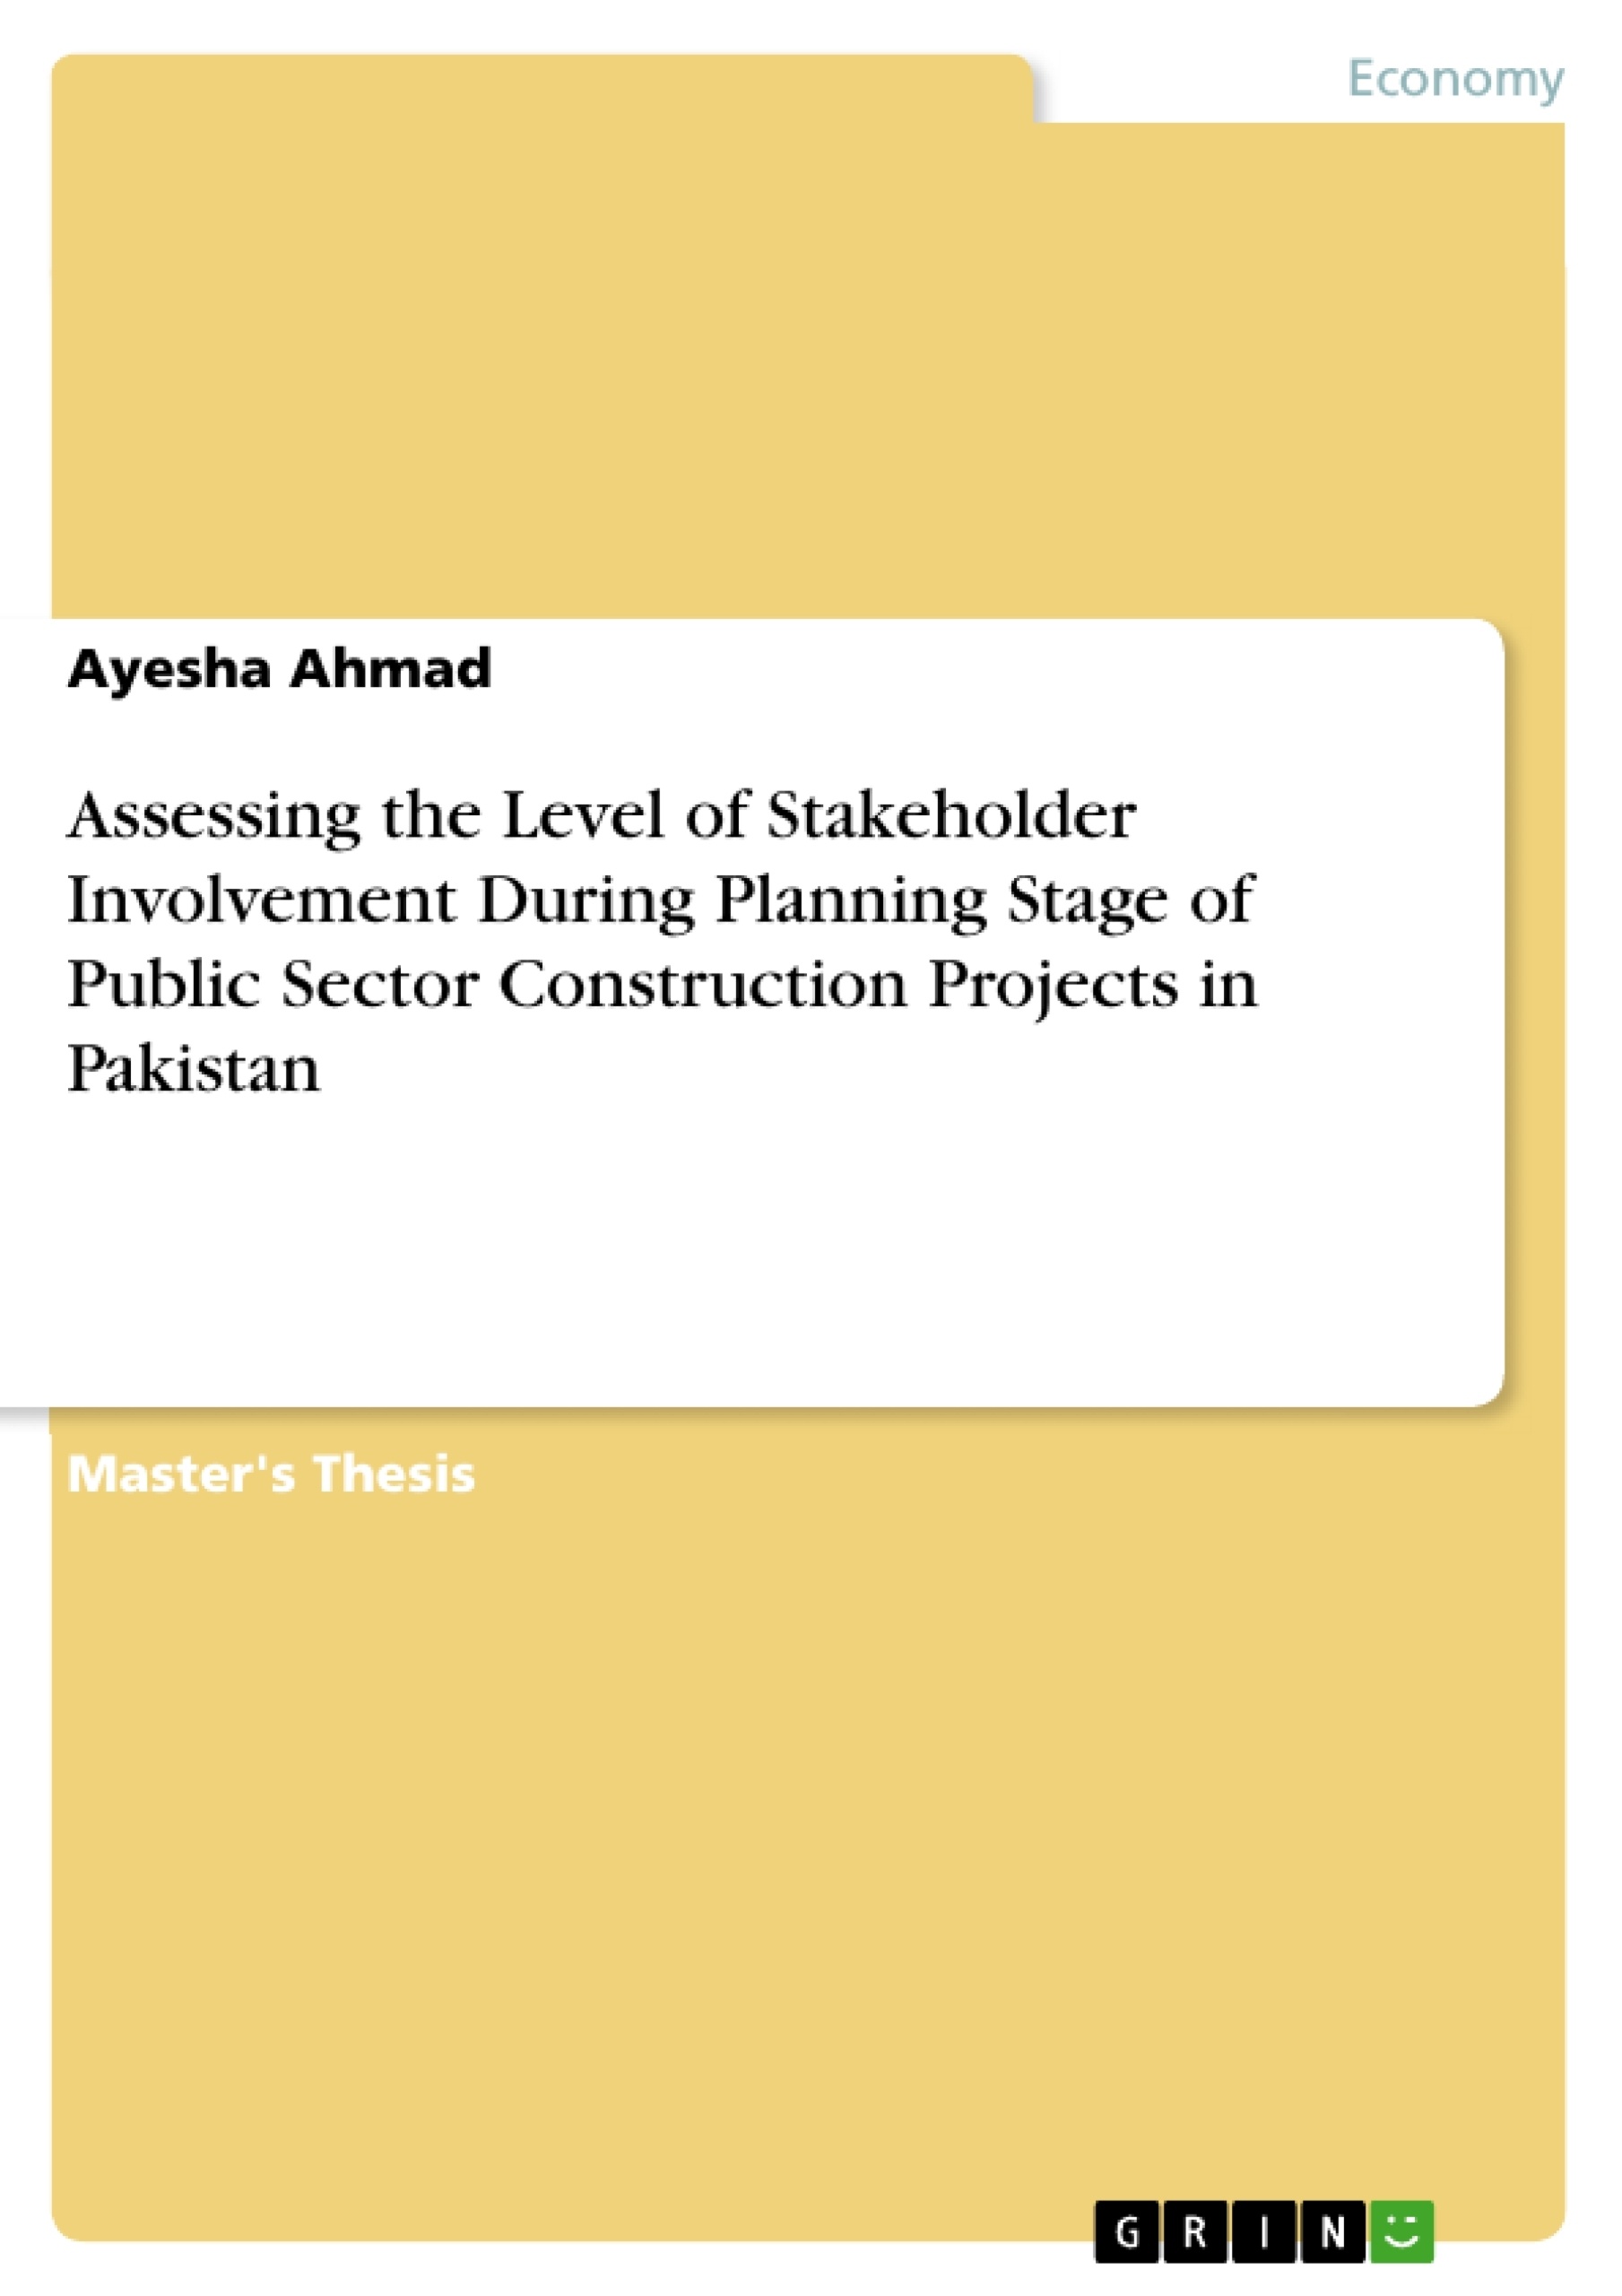 Título: Assessing the Level of Stakeholder Involvement During Planning Stage of Public Sector Construction Projects in Pakistan